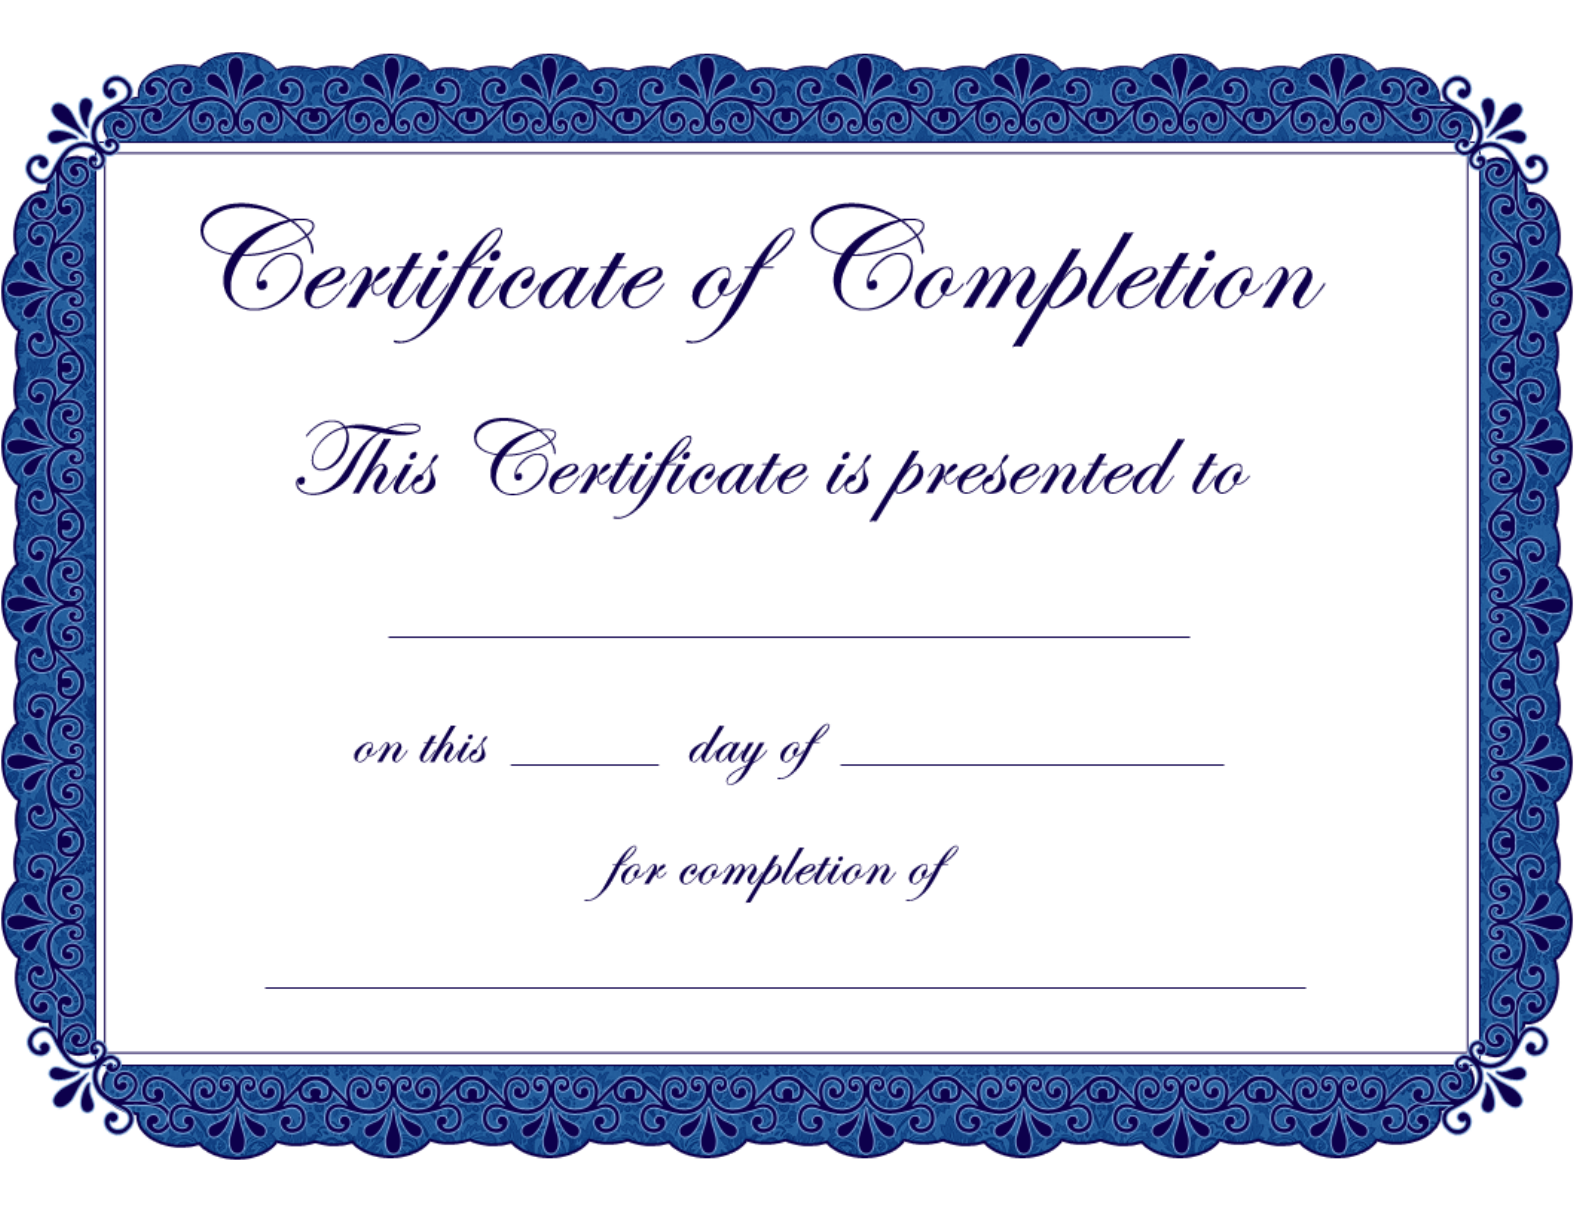 Completion certificate template Form - Edit, Fill, Sign Online Intended For Premarital Counseling Certificate Of Completion Template